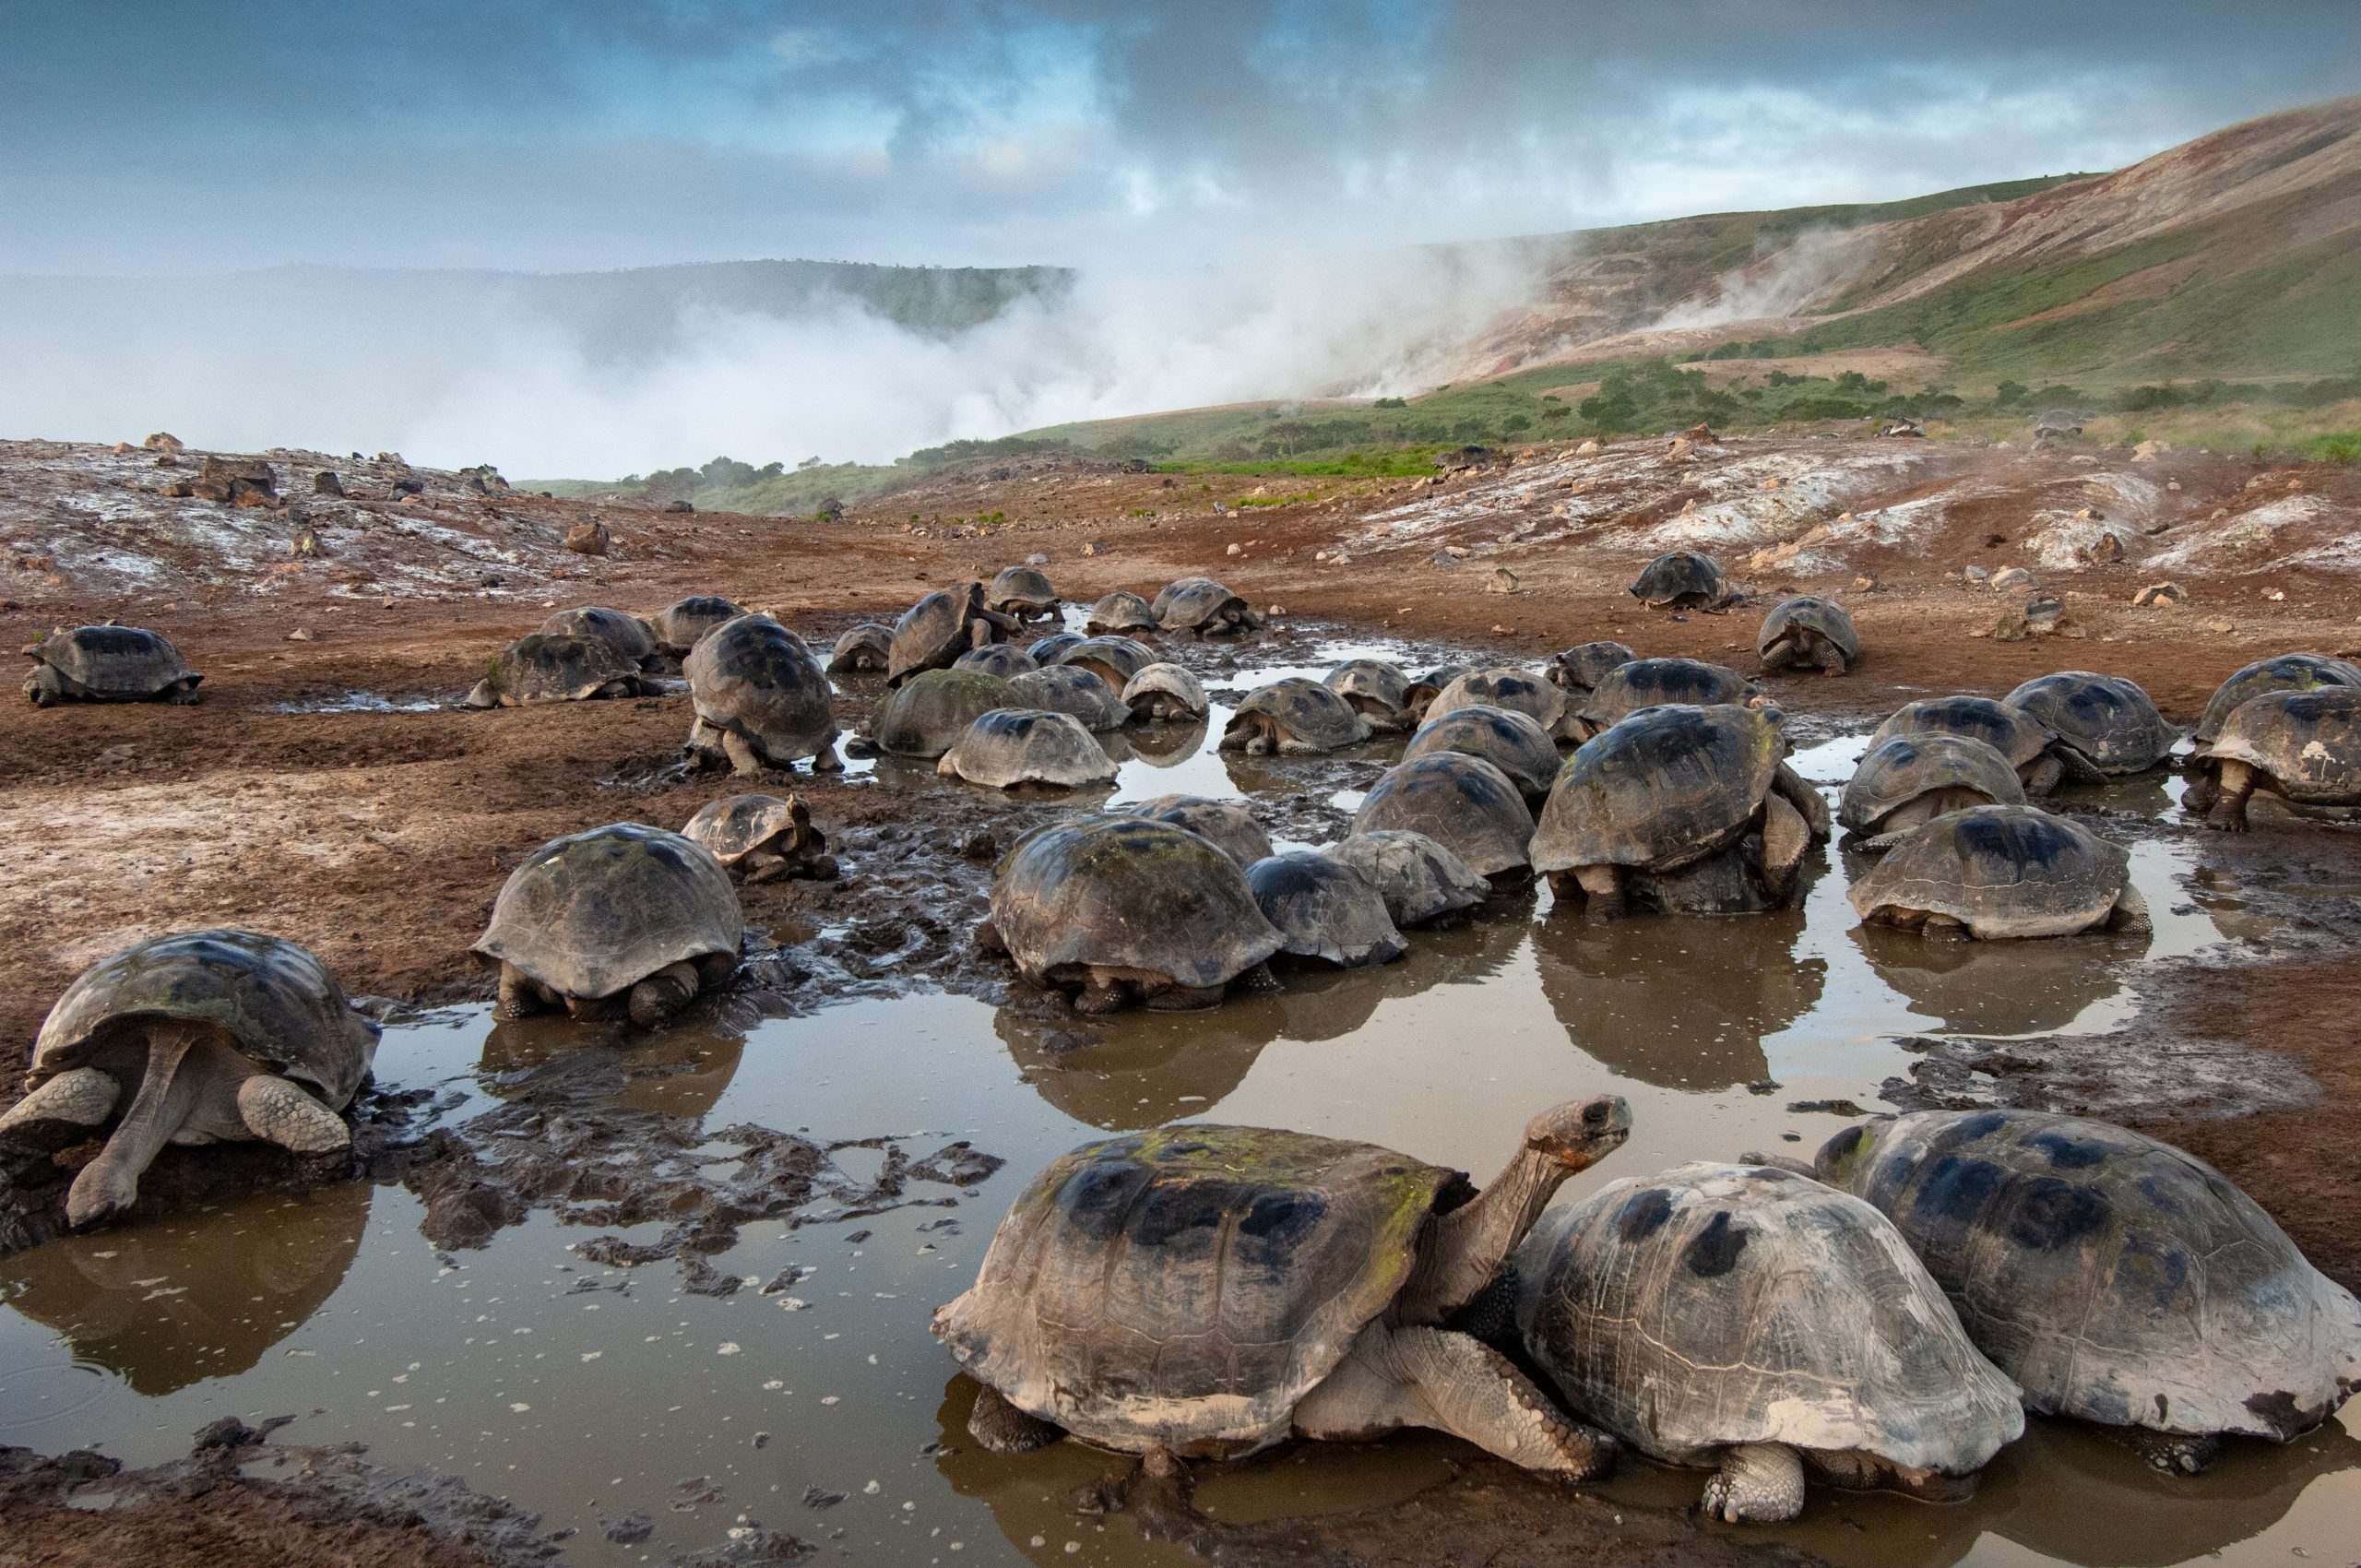 Giant tortoises in crater, by Pete Oxford